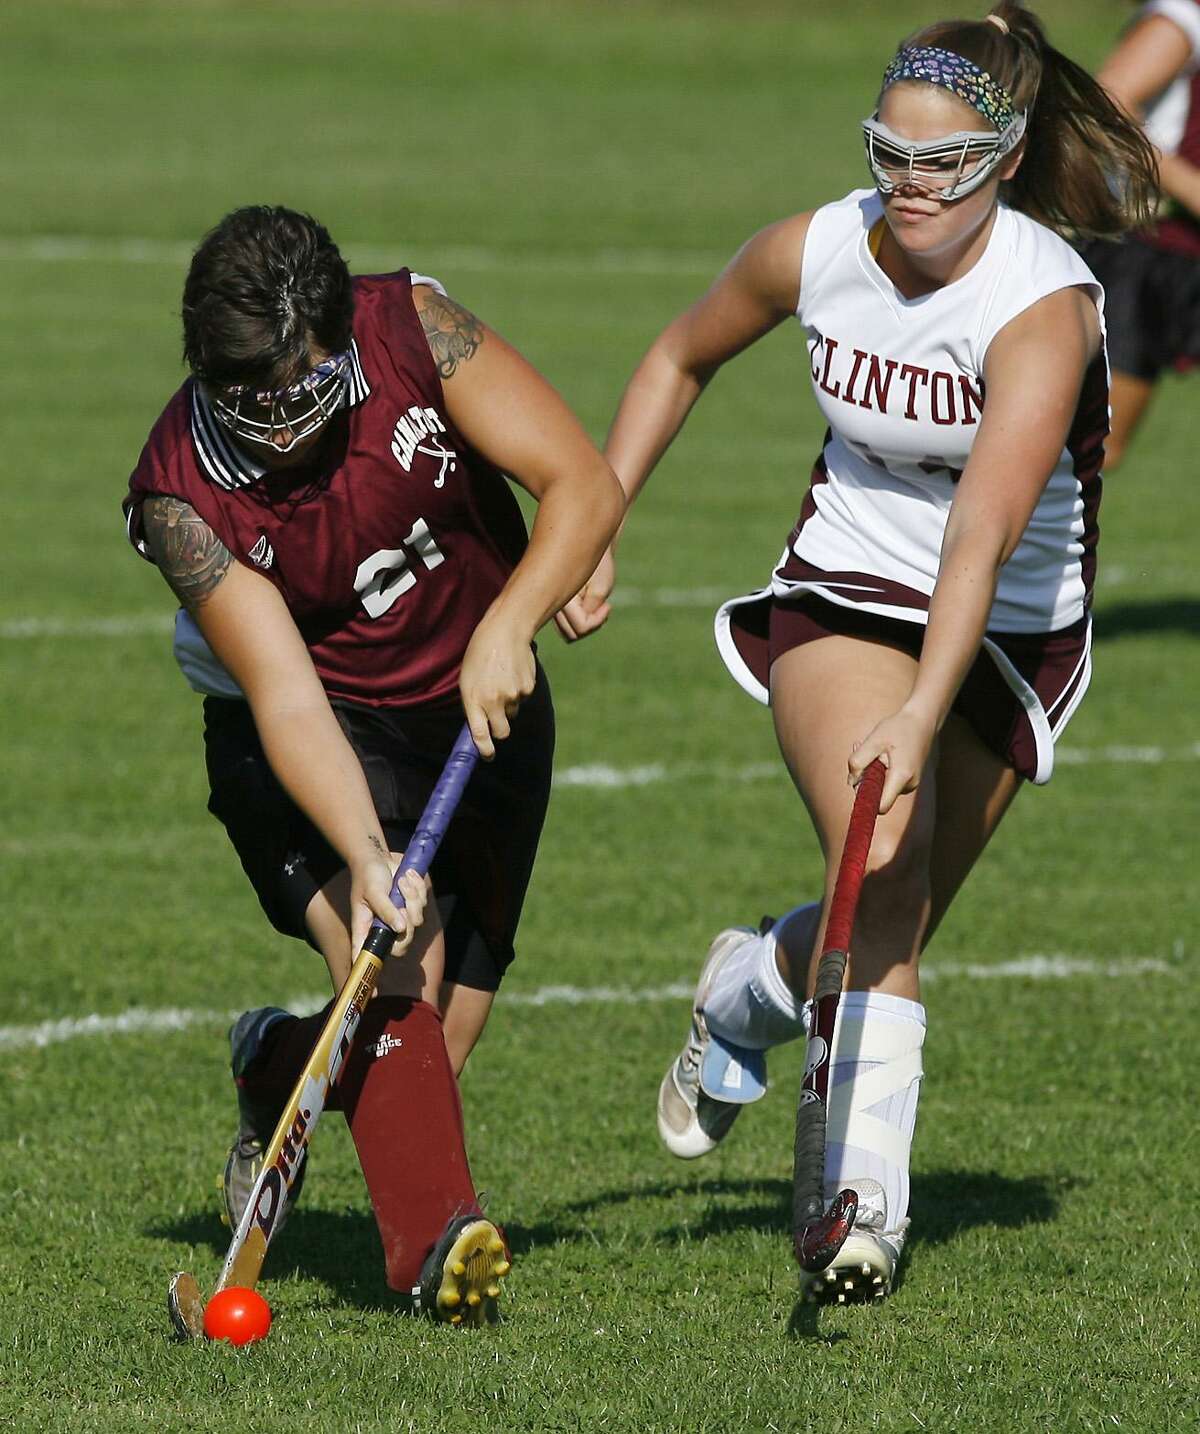 Dispatch Staff Photo by JOHN HAEGERtwitter.com/oneidaphotoCanastota's Kissandra Blasier (21) makes a run down field as Clinton's Emily Vicks (14) moves into defend in the first half of the match in Clinton on Friday, Sept. 9, 2011.